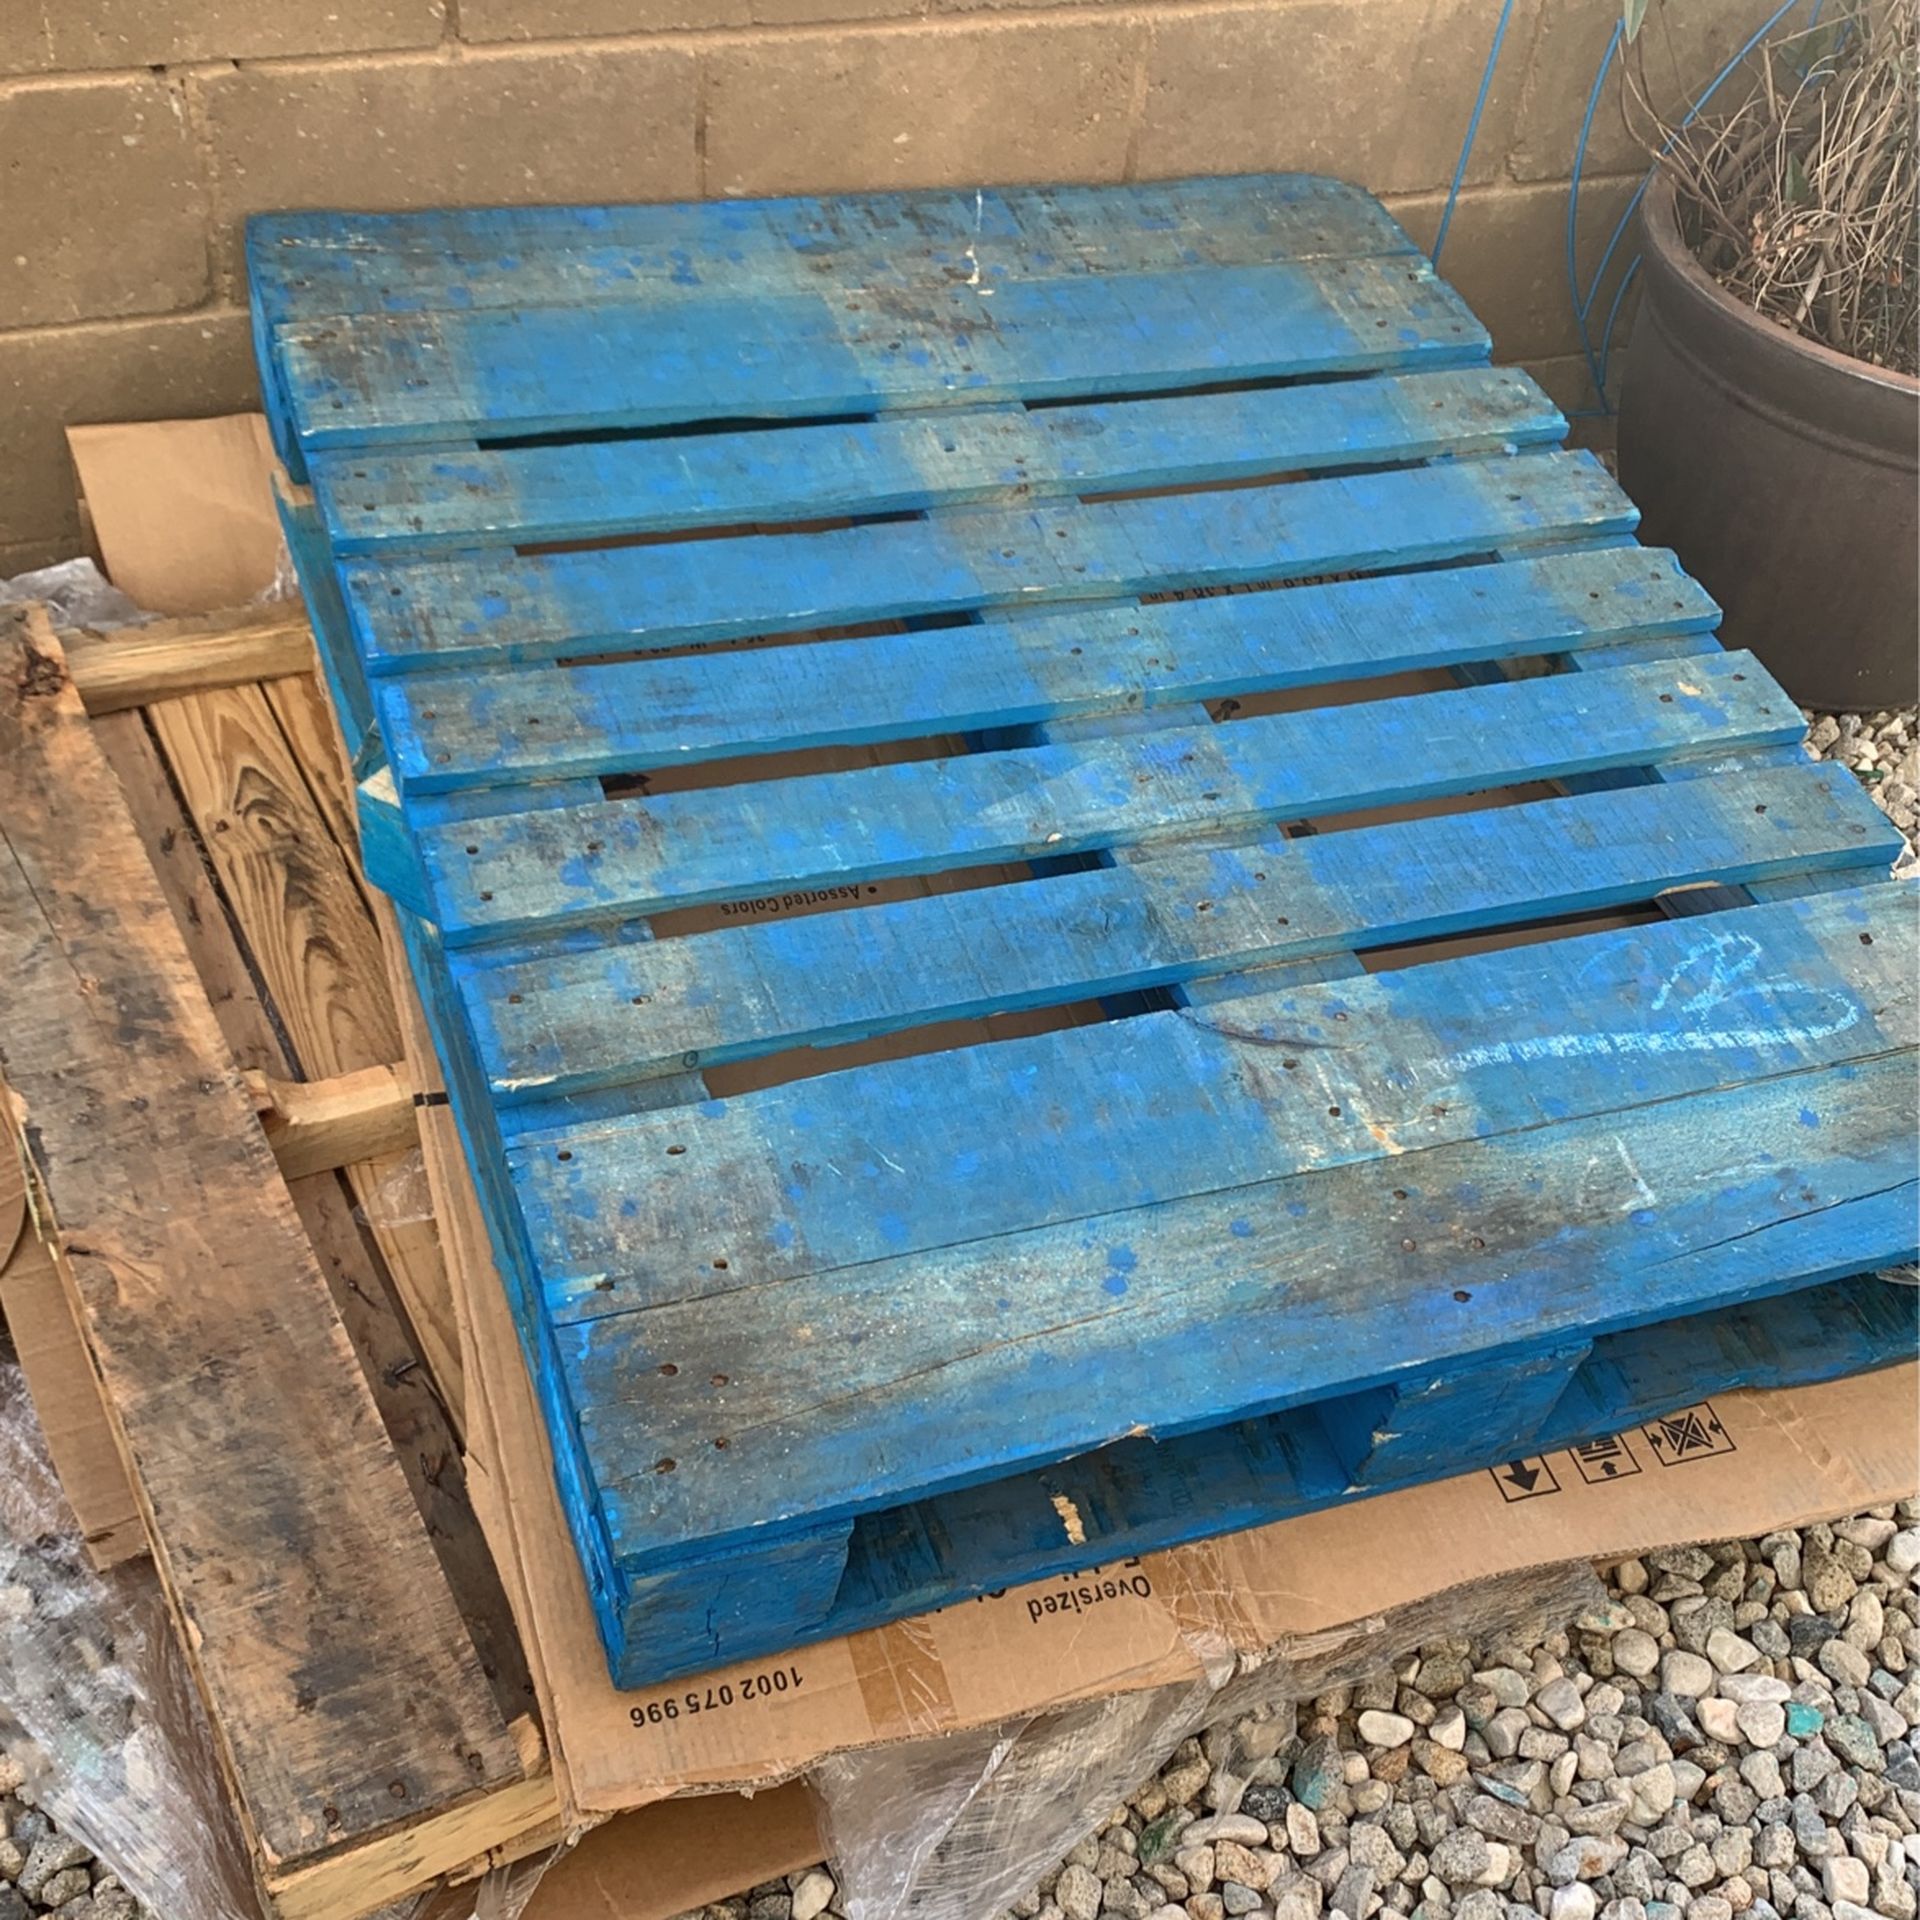 FREE Wood Pallets 2 Of Them